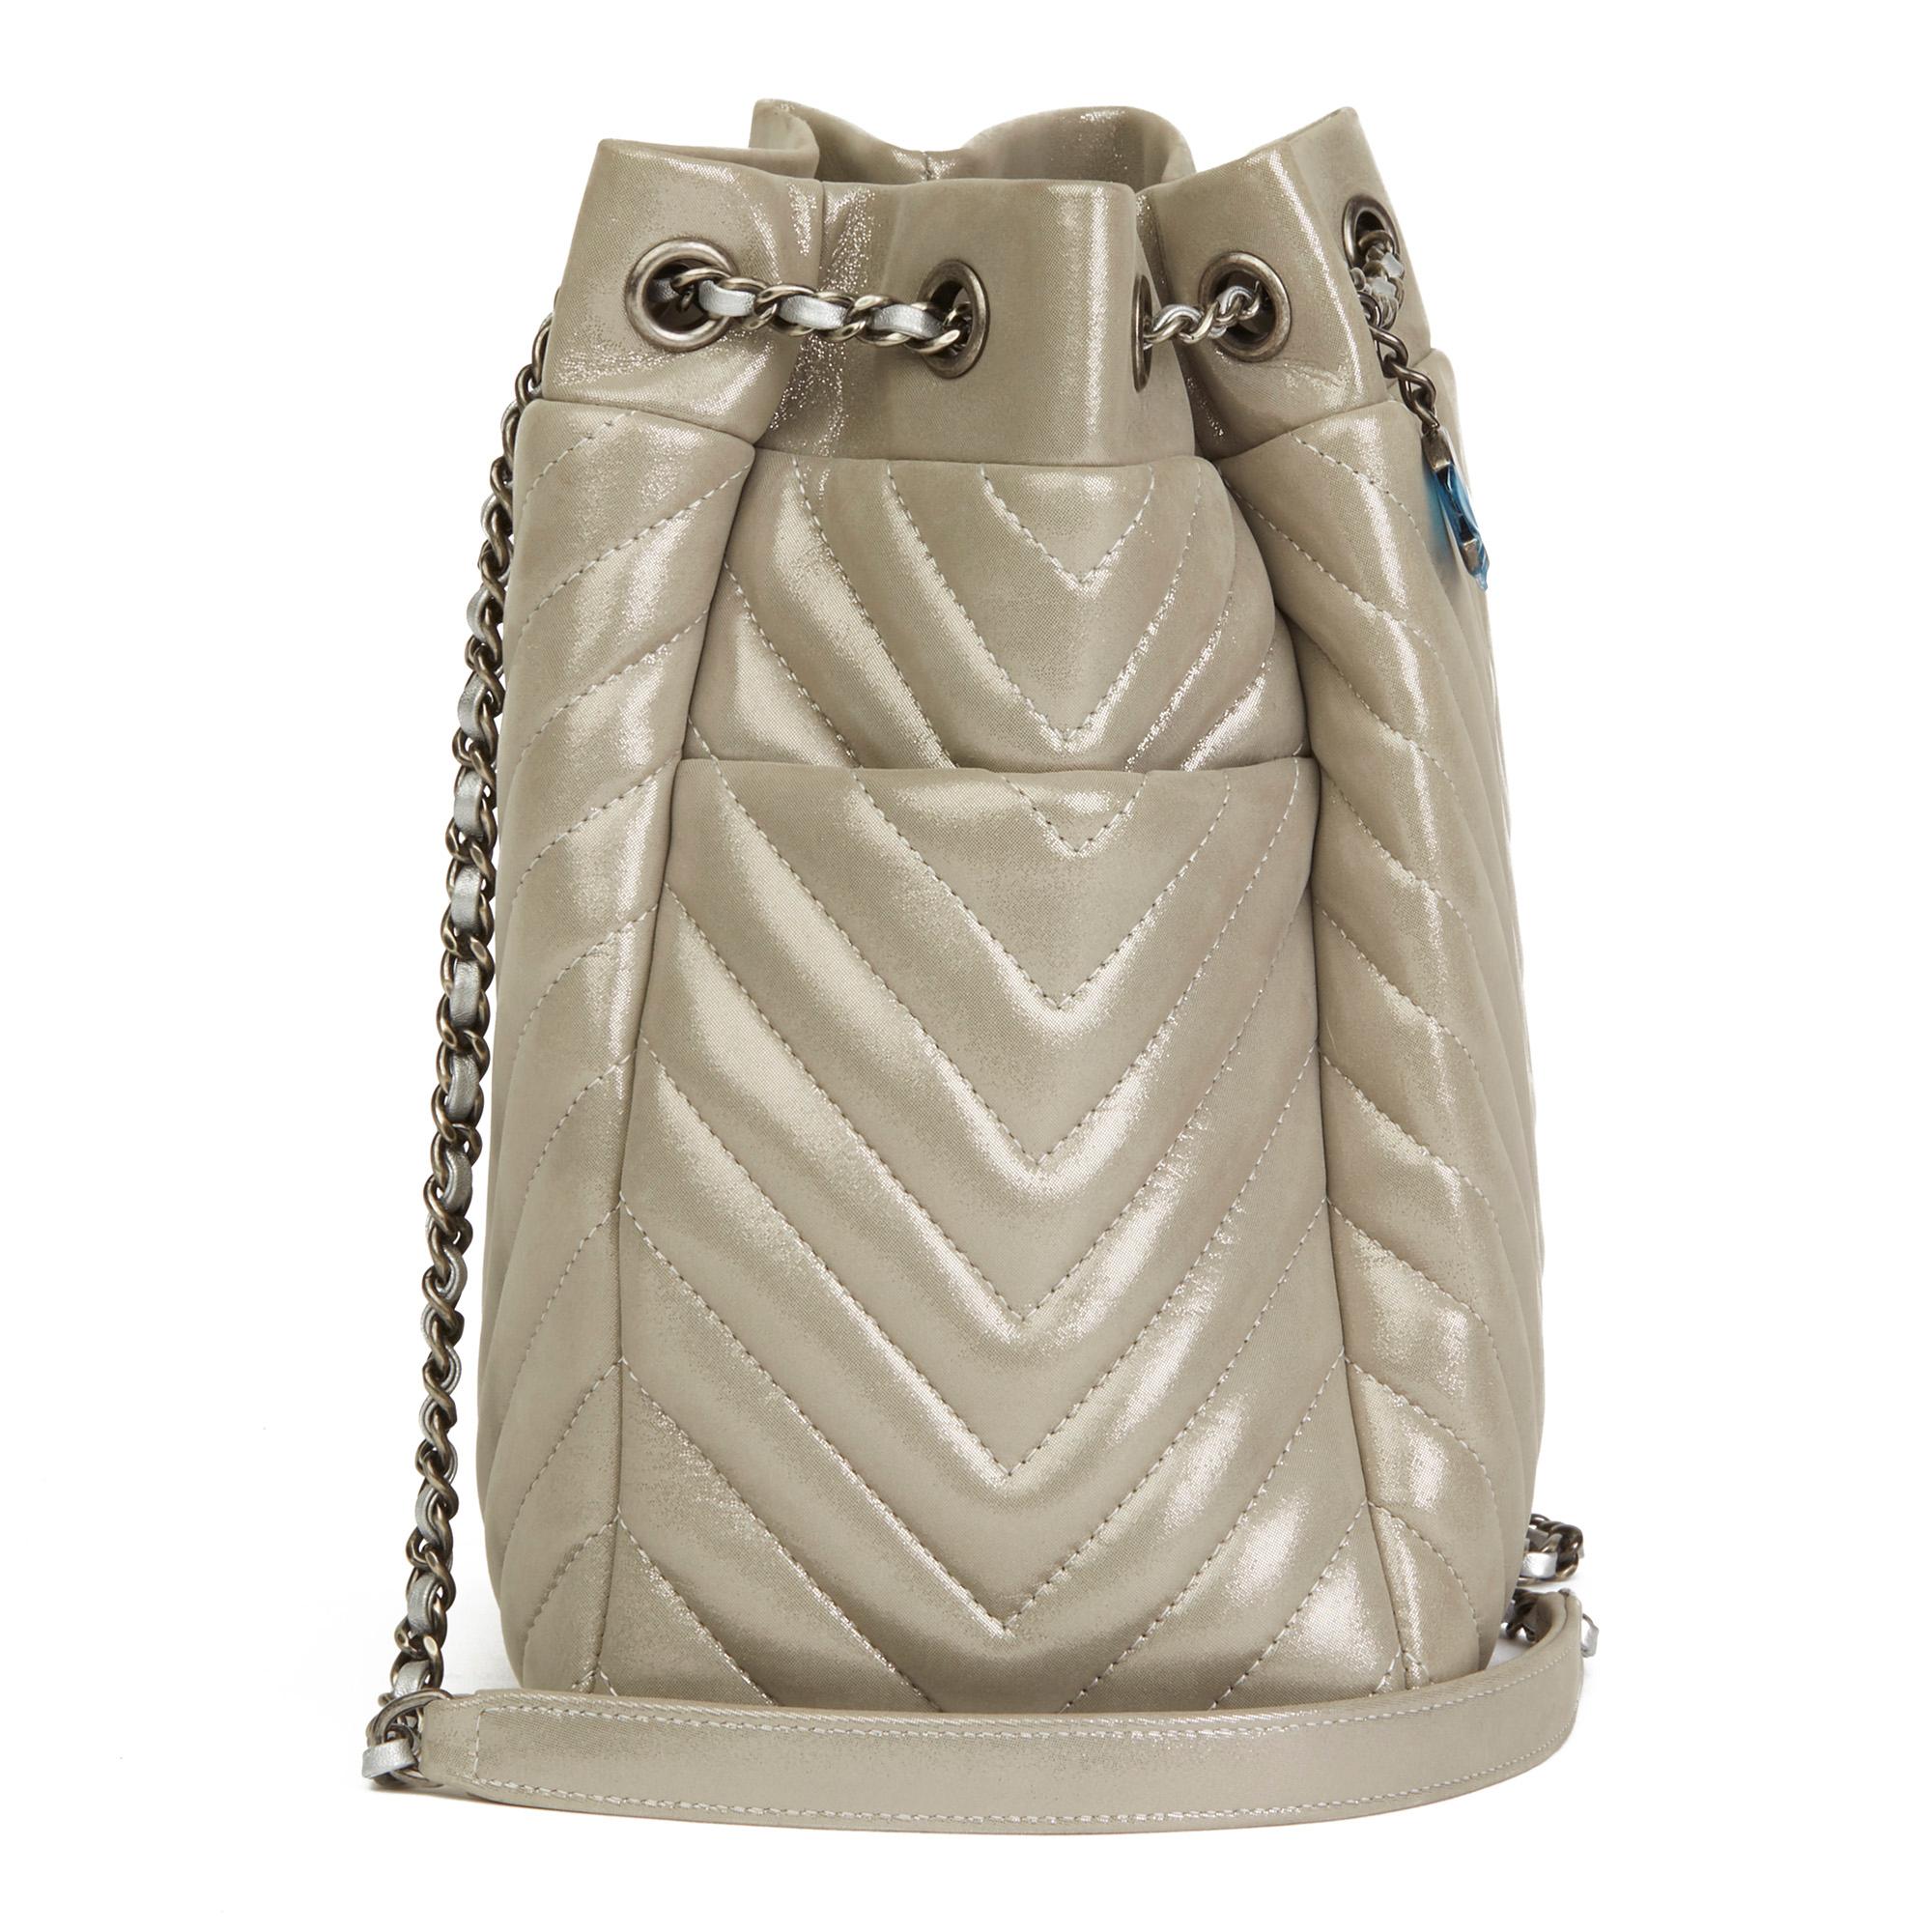 CHANEL
Silver Metallic Chevron Quilted Calfskin Leather Small Urban Spirit Bucket Bag

Serial Number: 22427936
Age (Circa): 2017
Accompanied By: Chanel Dust Bag, Authenticity Card
Authenticity Details: Serial Sticker, Authenticity Card (Made in